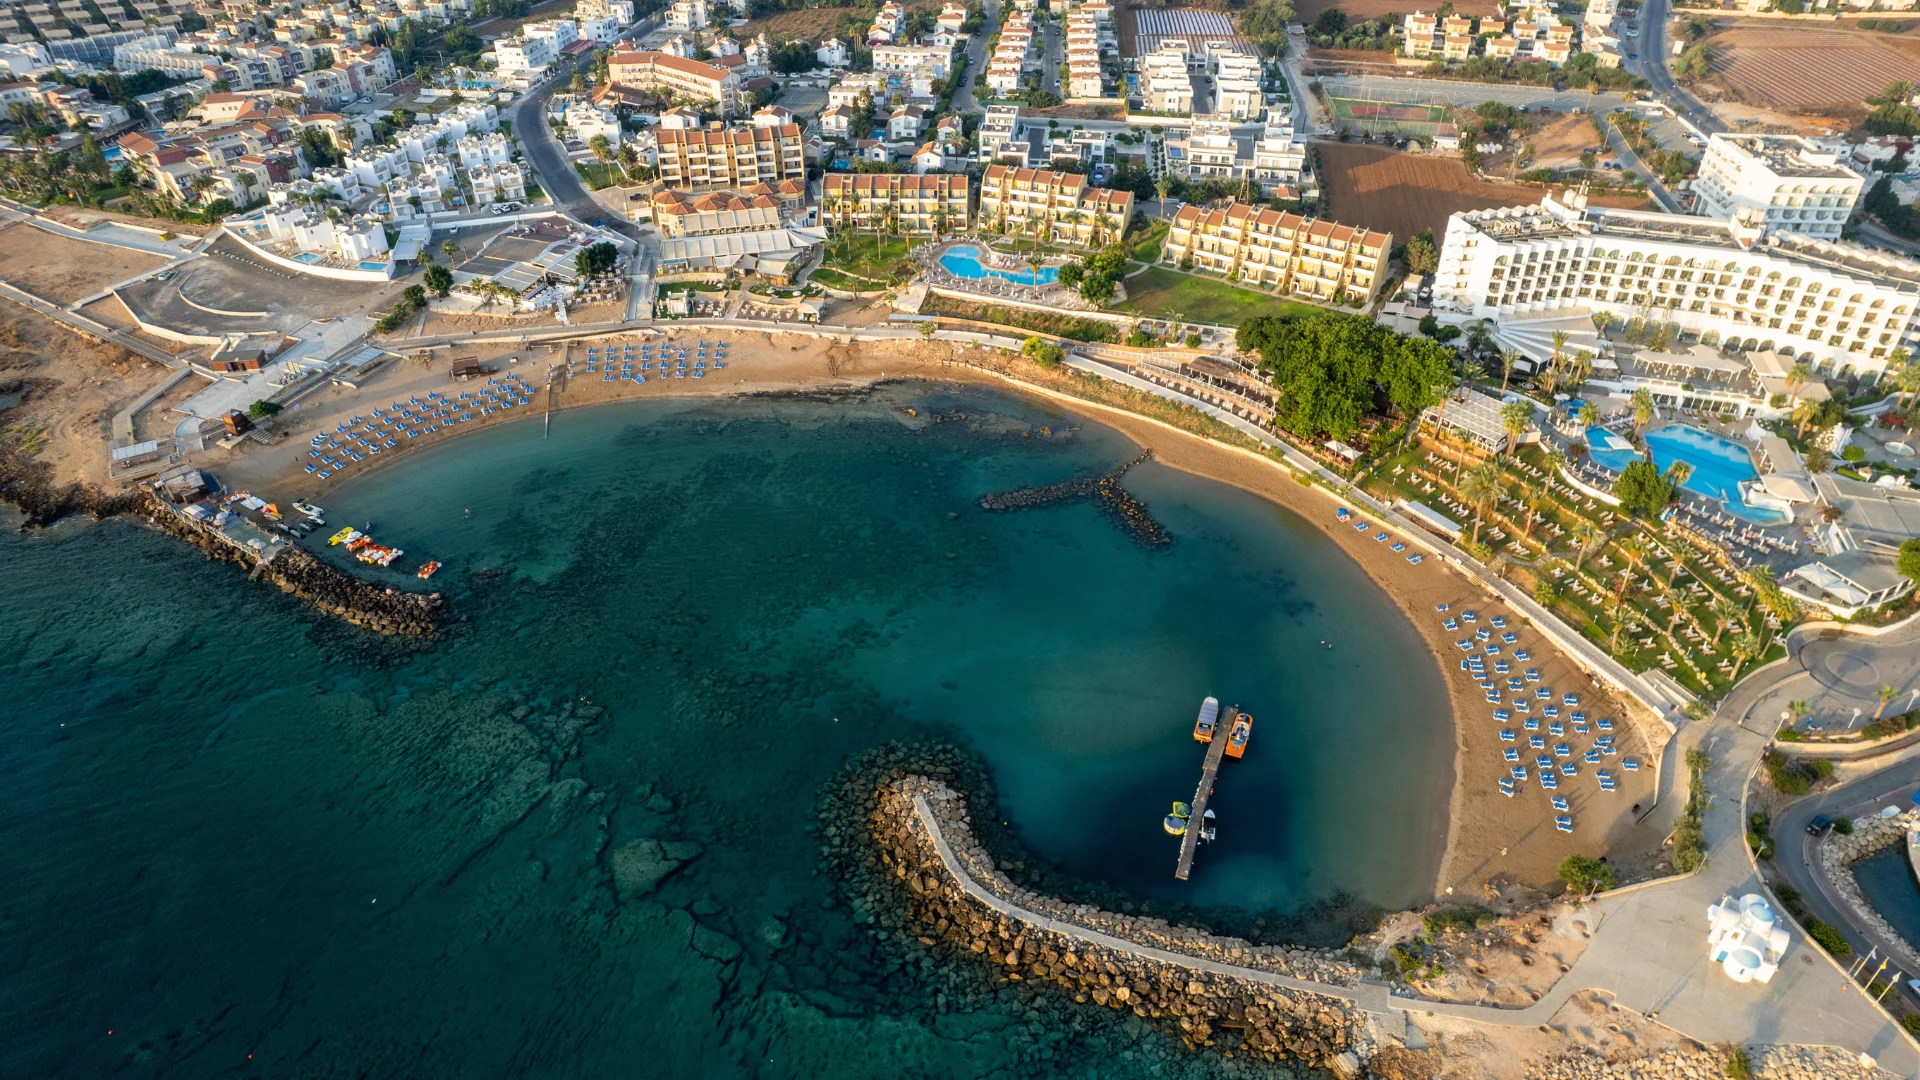 An aerial view of the coastal area and harbour in Limassol, Cyprus